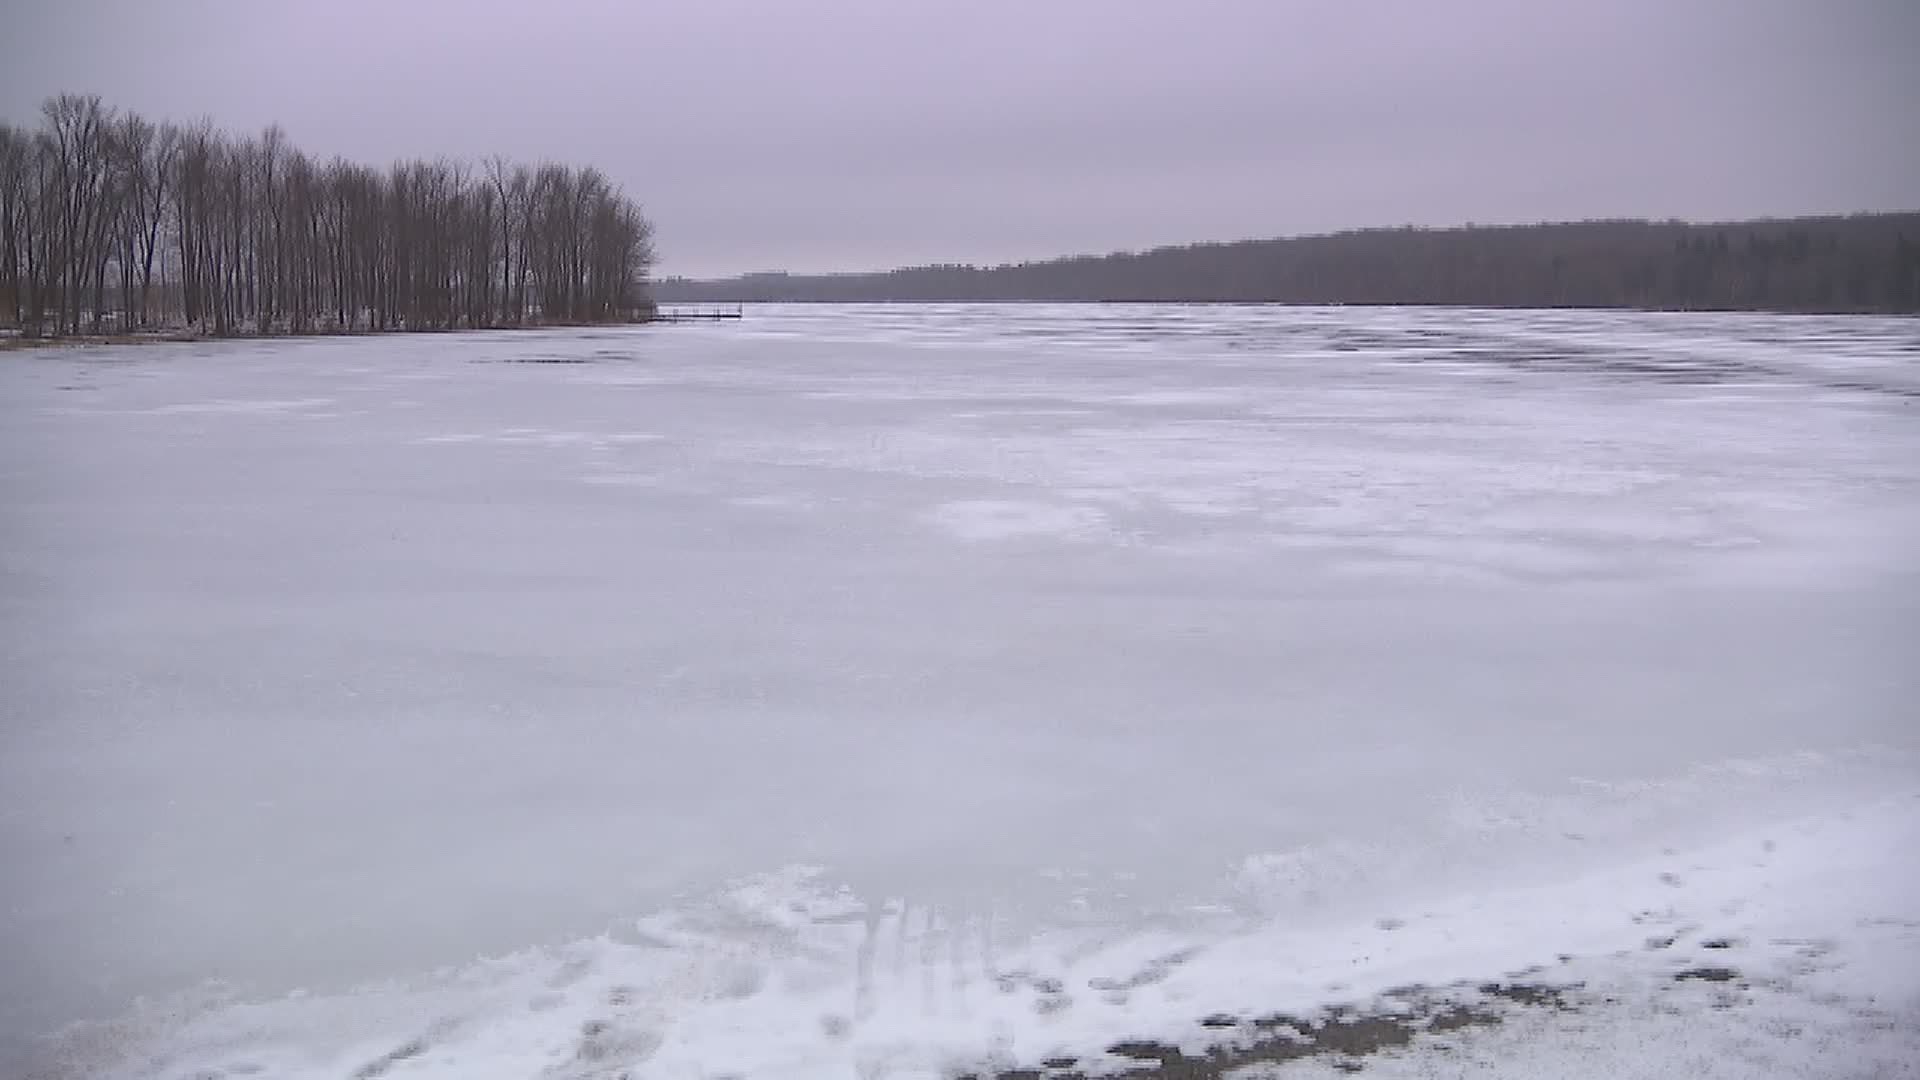 Anglers and business owners are weighing in on lack of winter weather for ice fishing season.